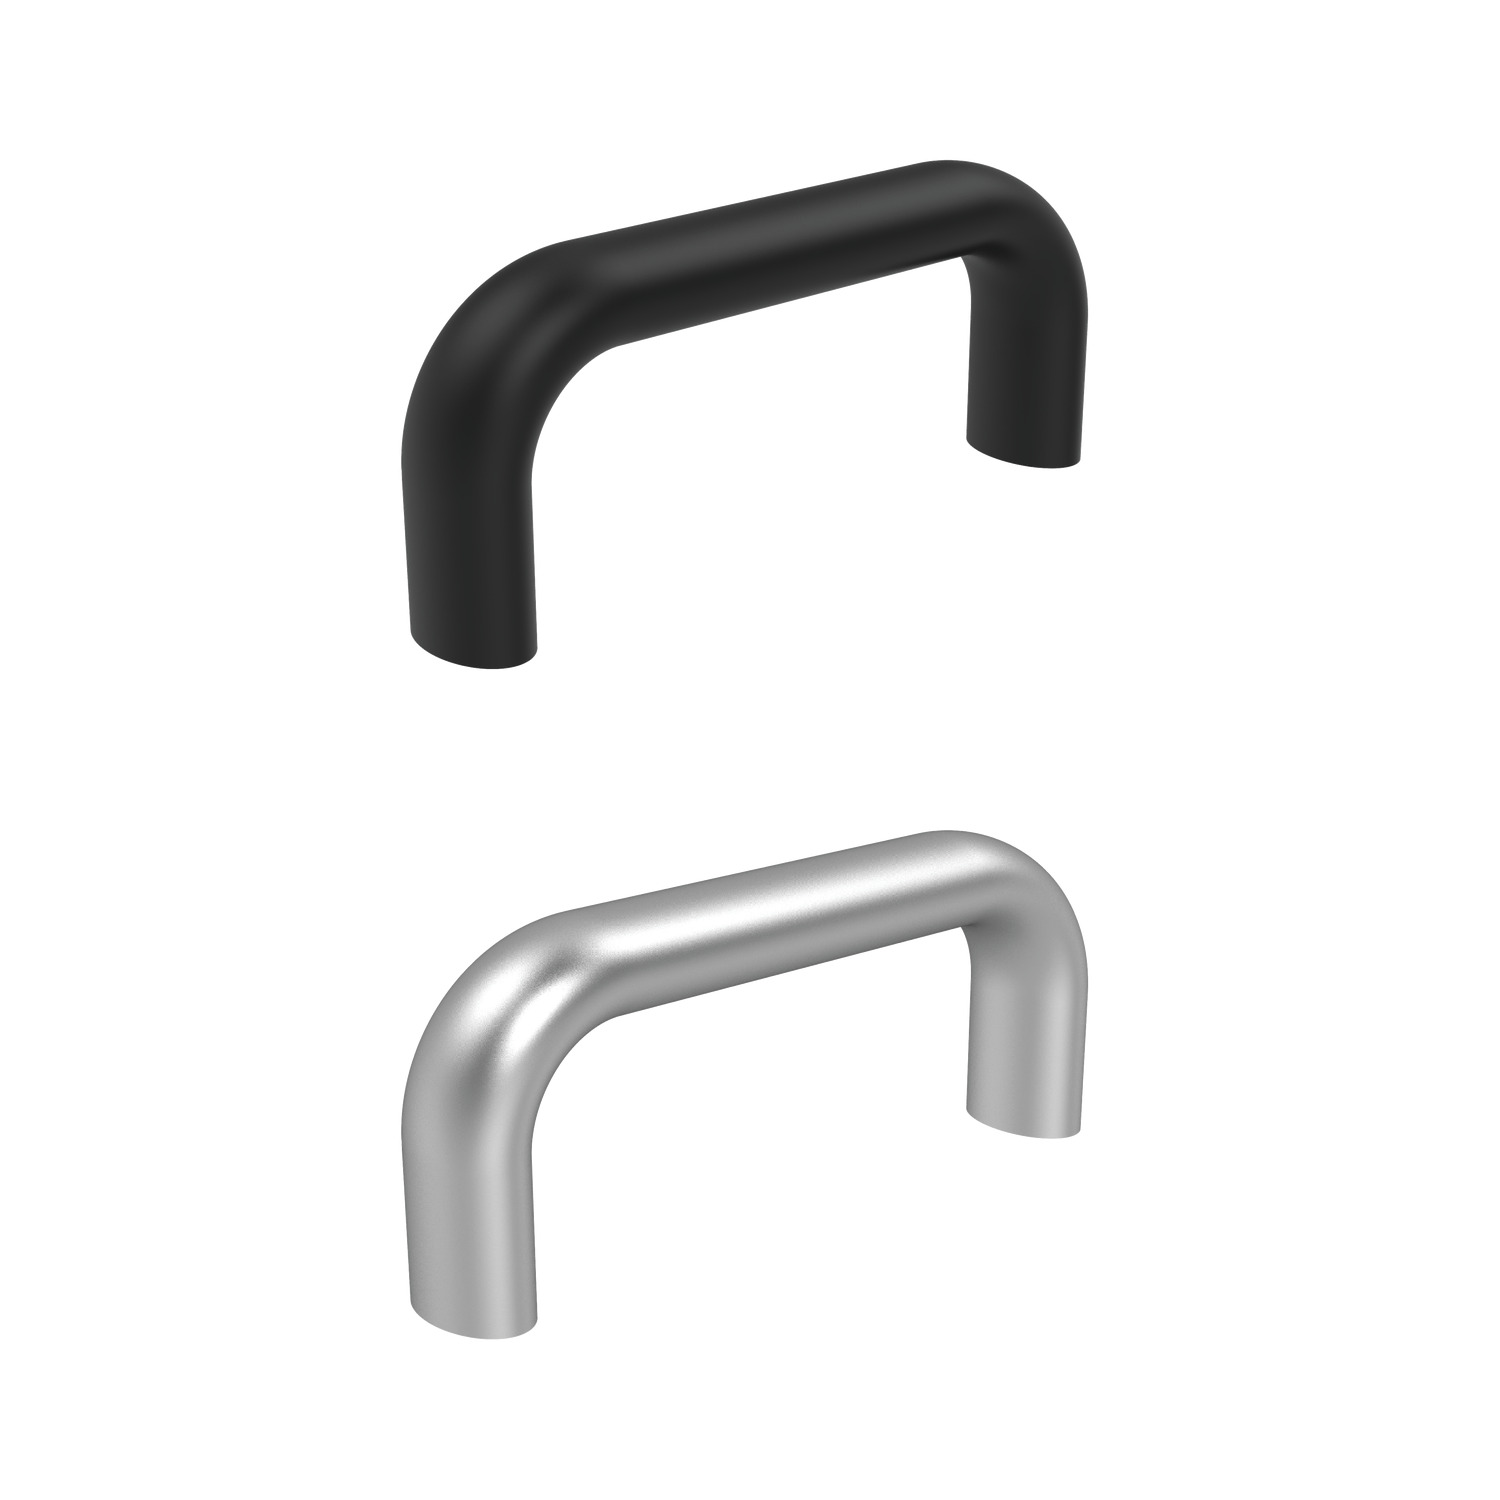 Cabinet Handles Aluminium cabinet pull handles also angled and offset type in a variety of finishes. Pull handles for drawers and instrument panels as well as heavy duty grip type.